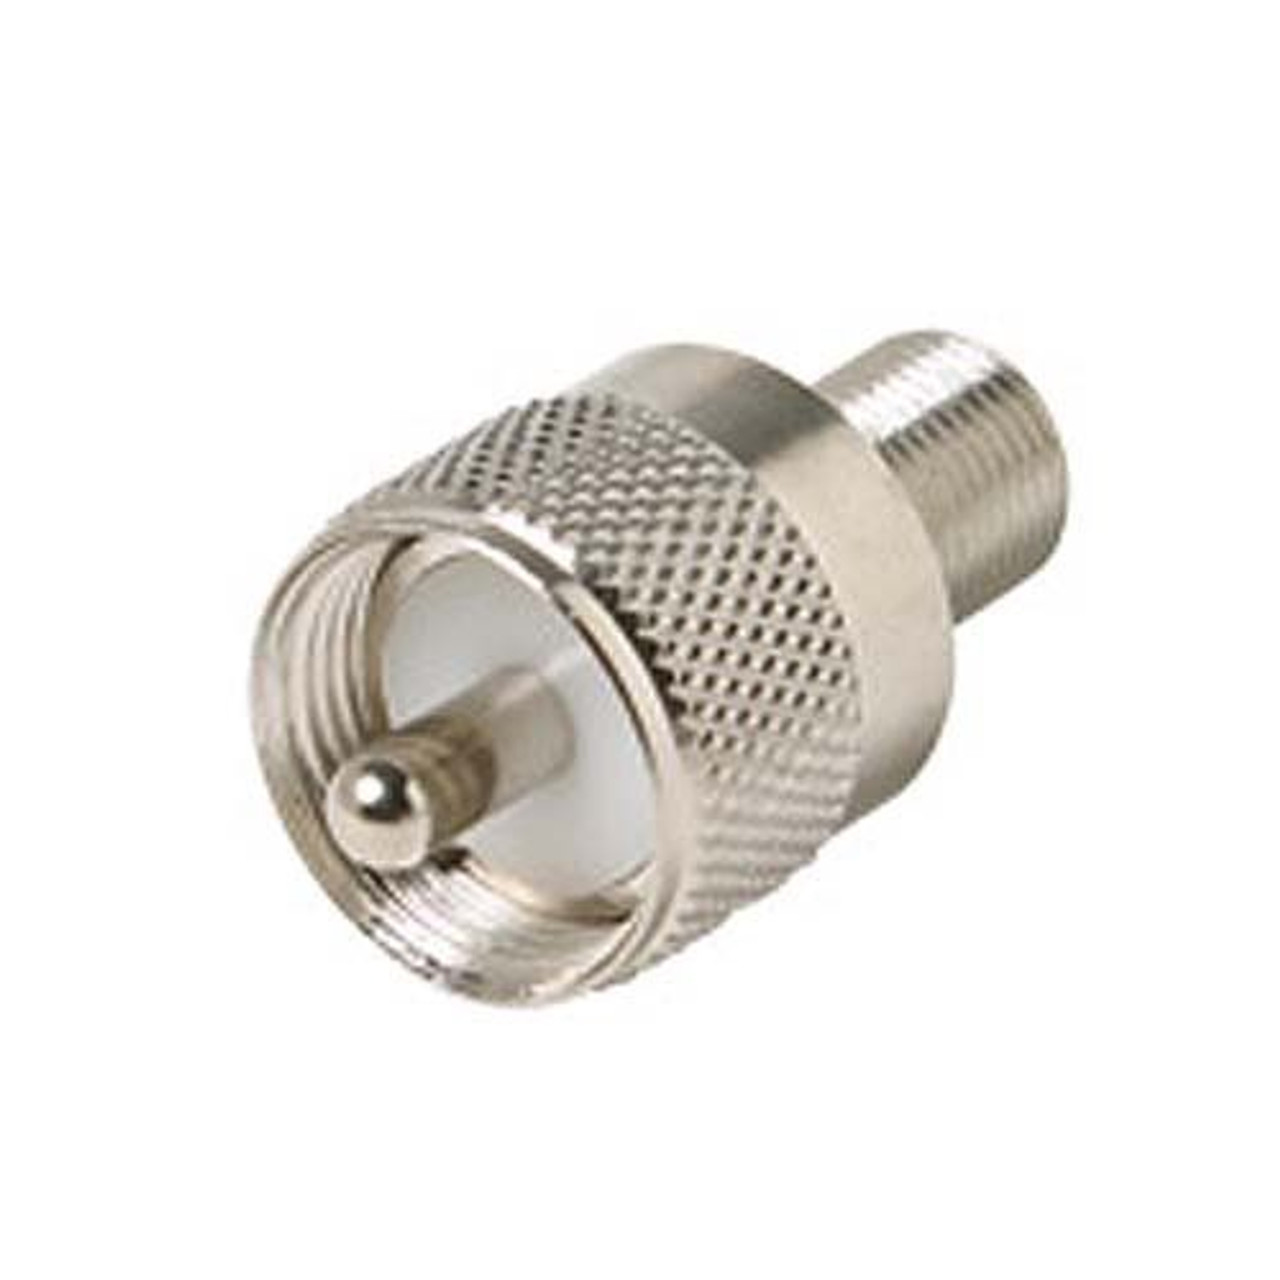 Steren 200-194 UHF Male Plug to F-Female Jack Adapter Coaxial Connector UHF Plug to F Jack Commercial Grade Nickel Plated with Delrin Insulator TV Antenna Satellite Components Plug, Part # 200194